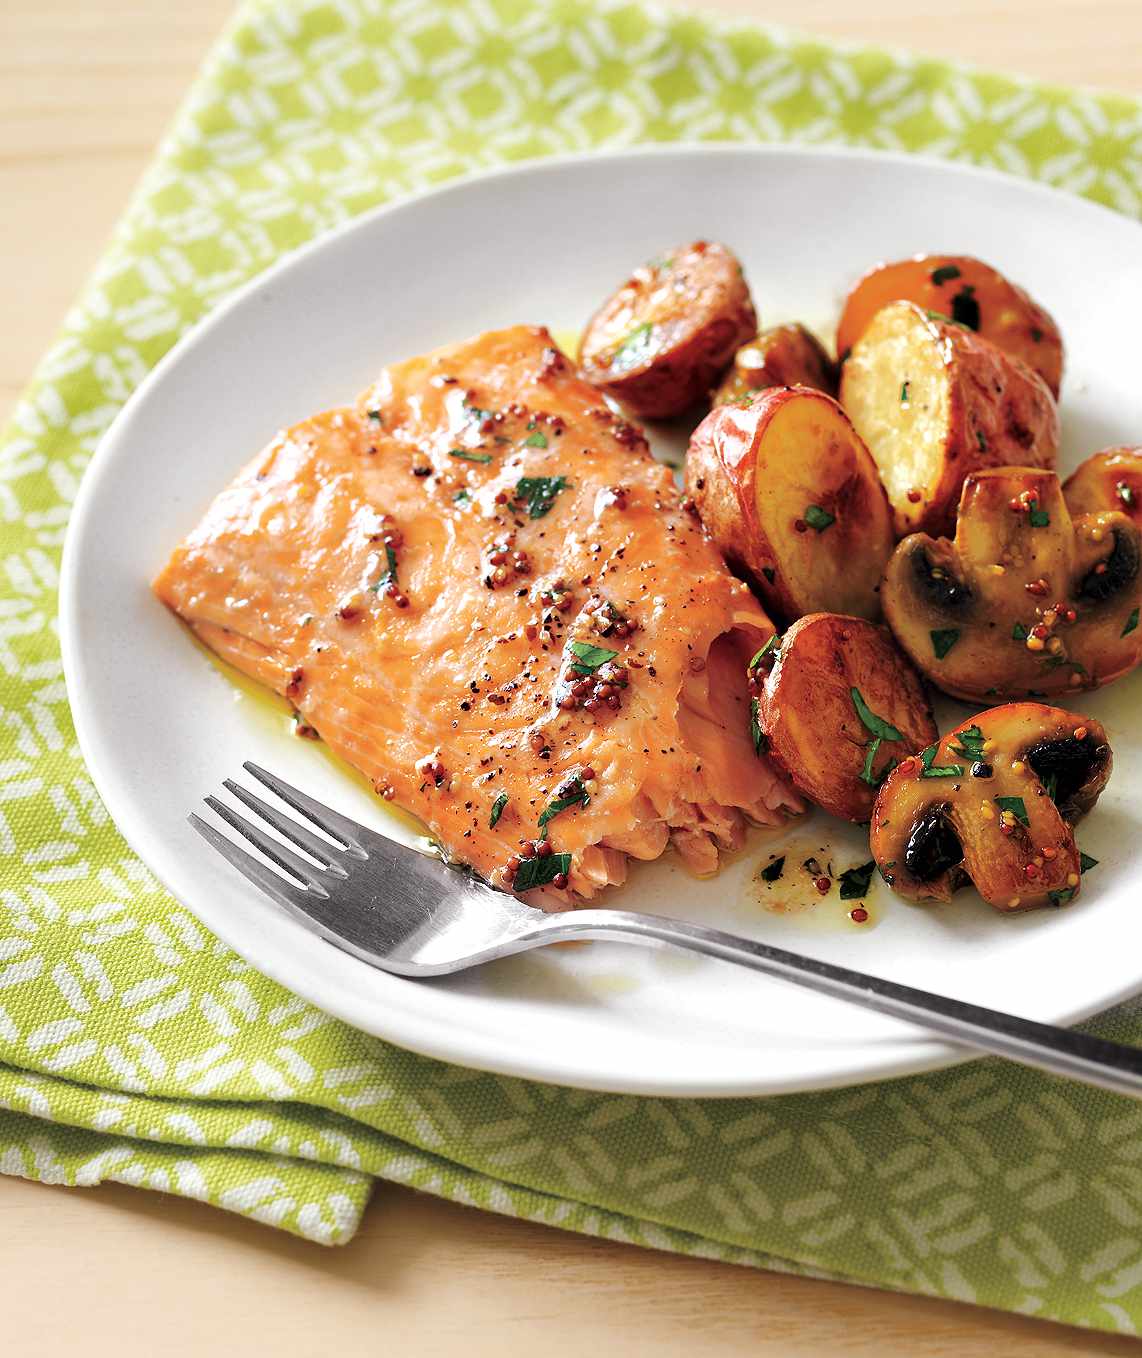 Roasted Salmon With Potatoes and Mushrooms